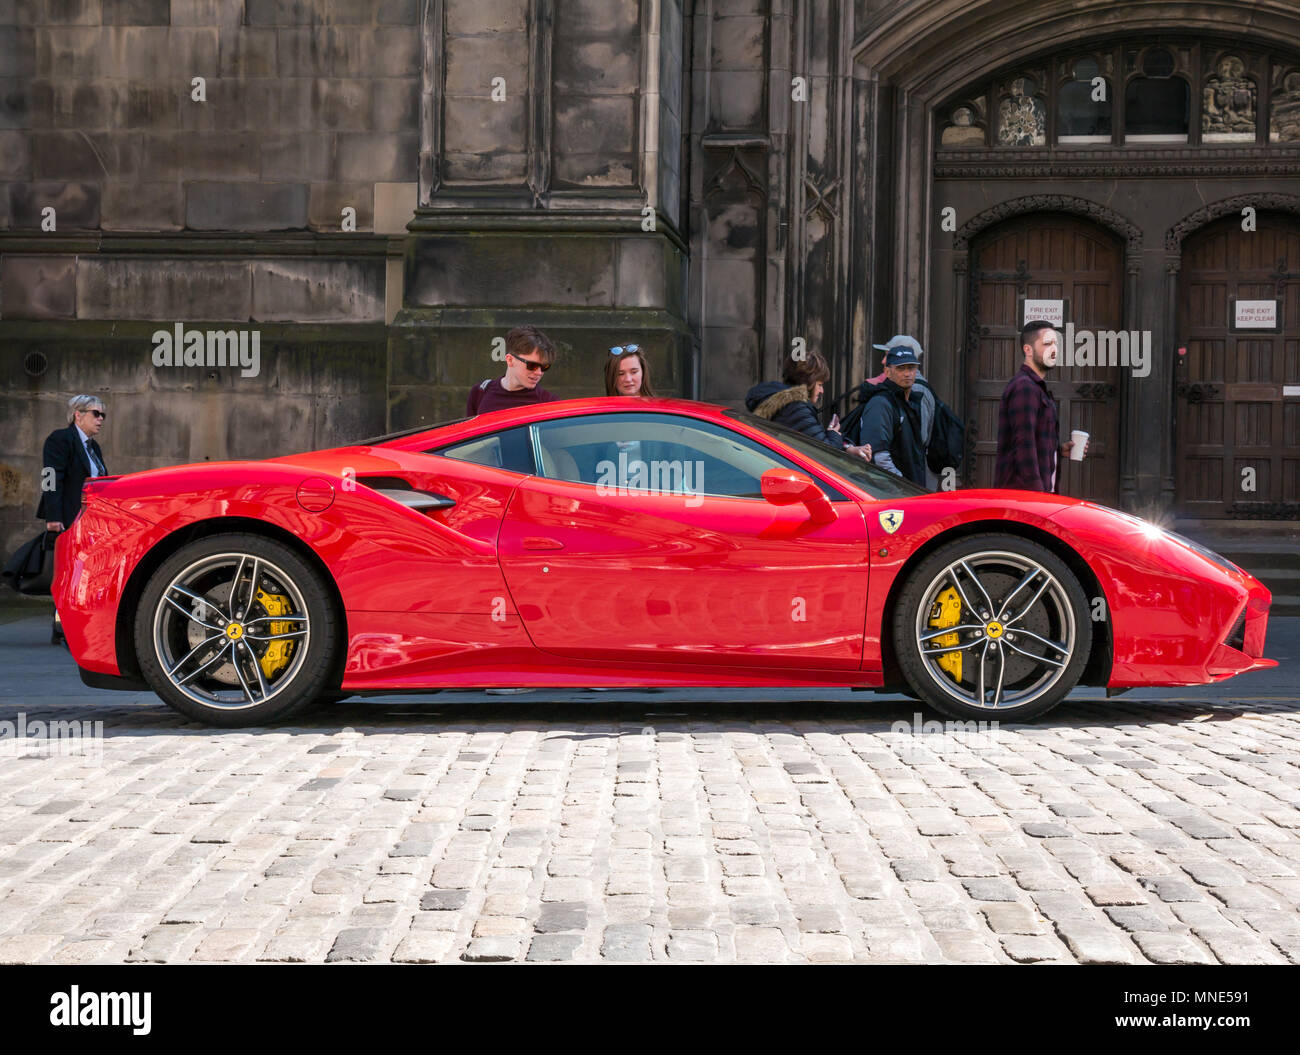 Royal Mile, Edinburgh, Scotland, United Kingdom, May 2018. People passing by a bright red Ferrari 488 GTB coupe sports car parked on a double yellow line on the cobbled Royal Mile next to St Giles Cathedral, giving envious looks Stock Photo